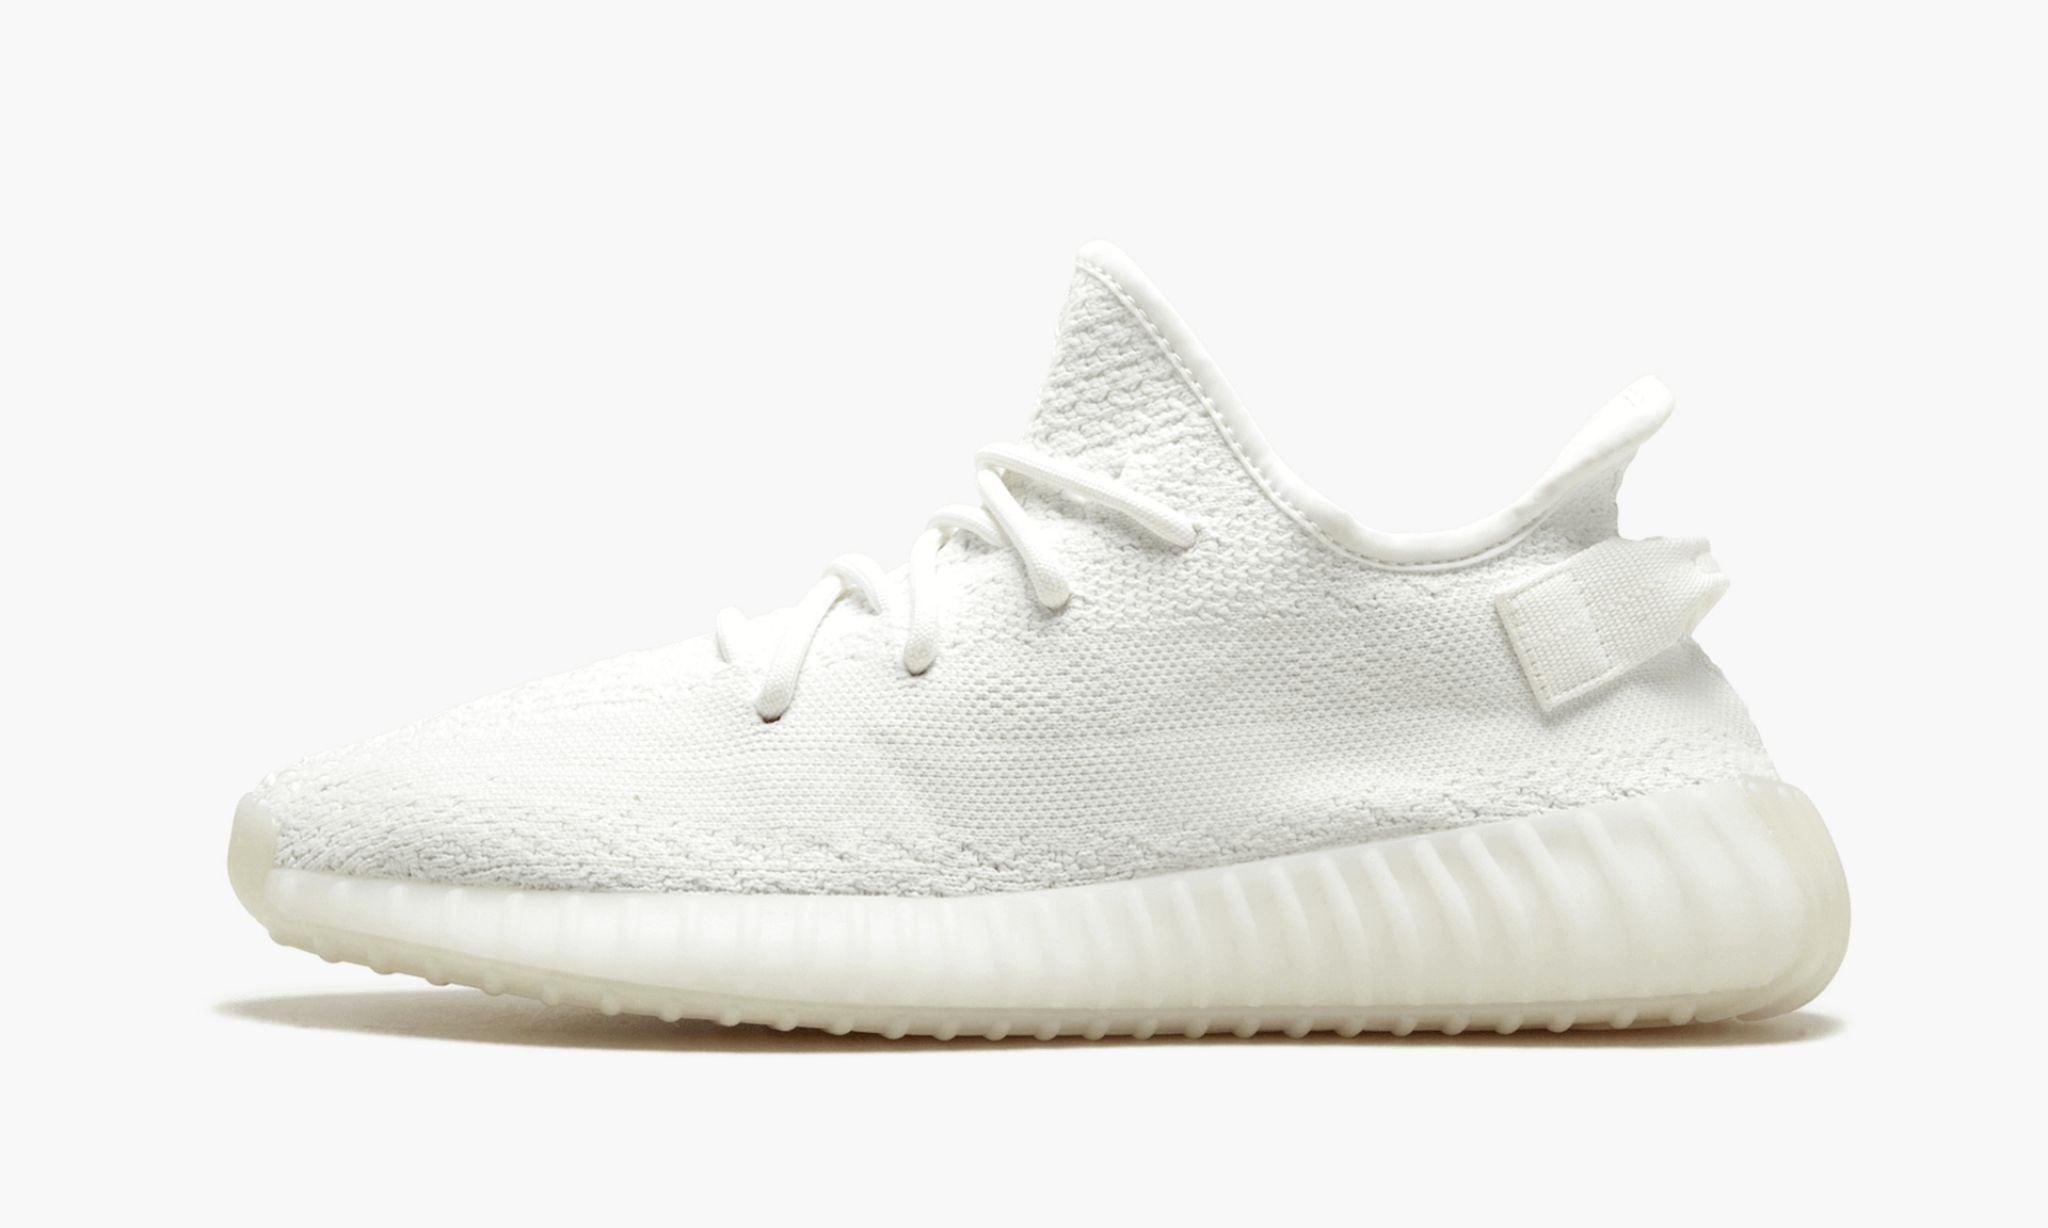 The adidas Yeezy Boost 350 V2 "Triple White